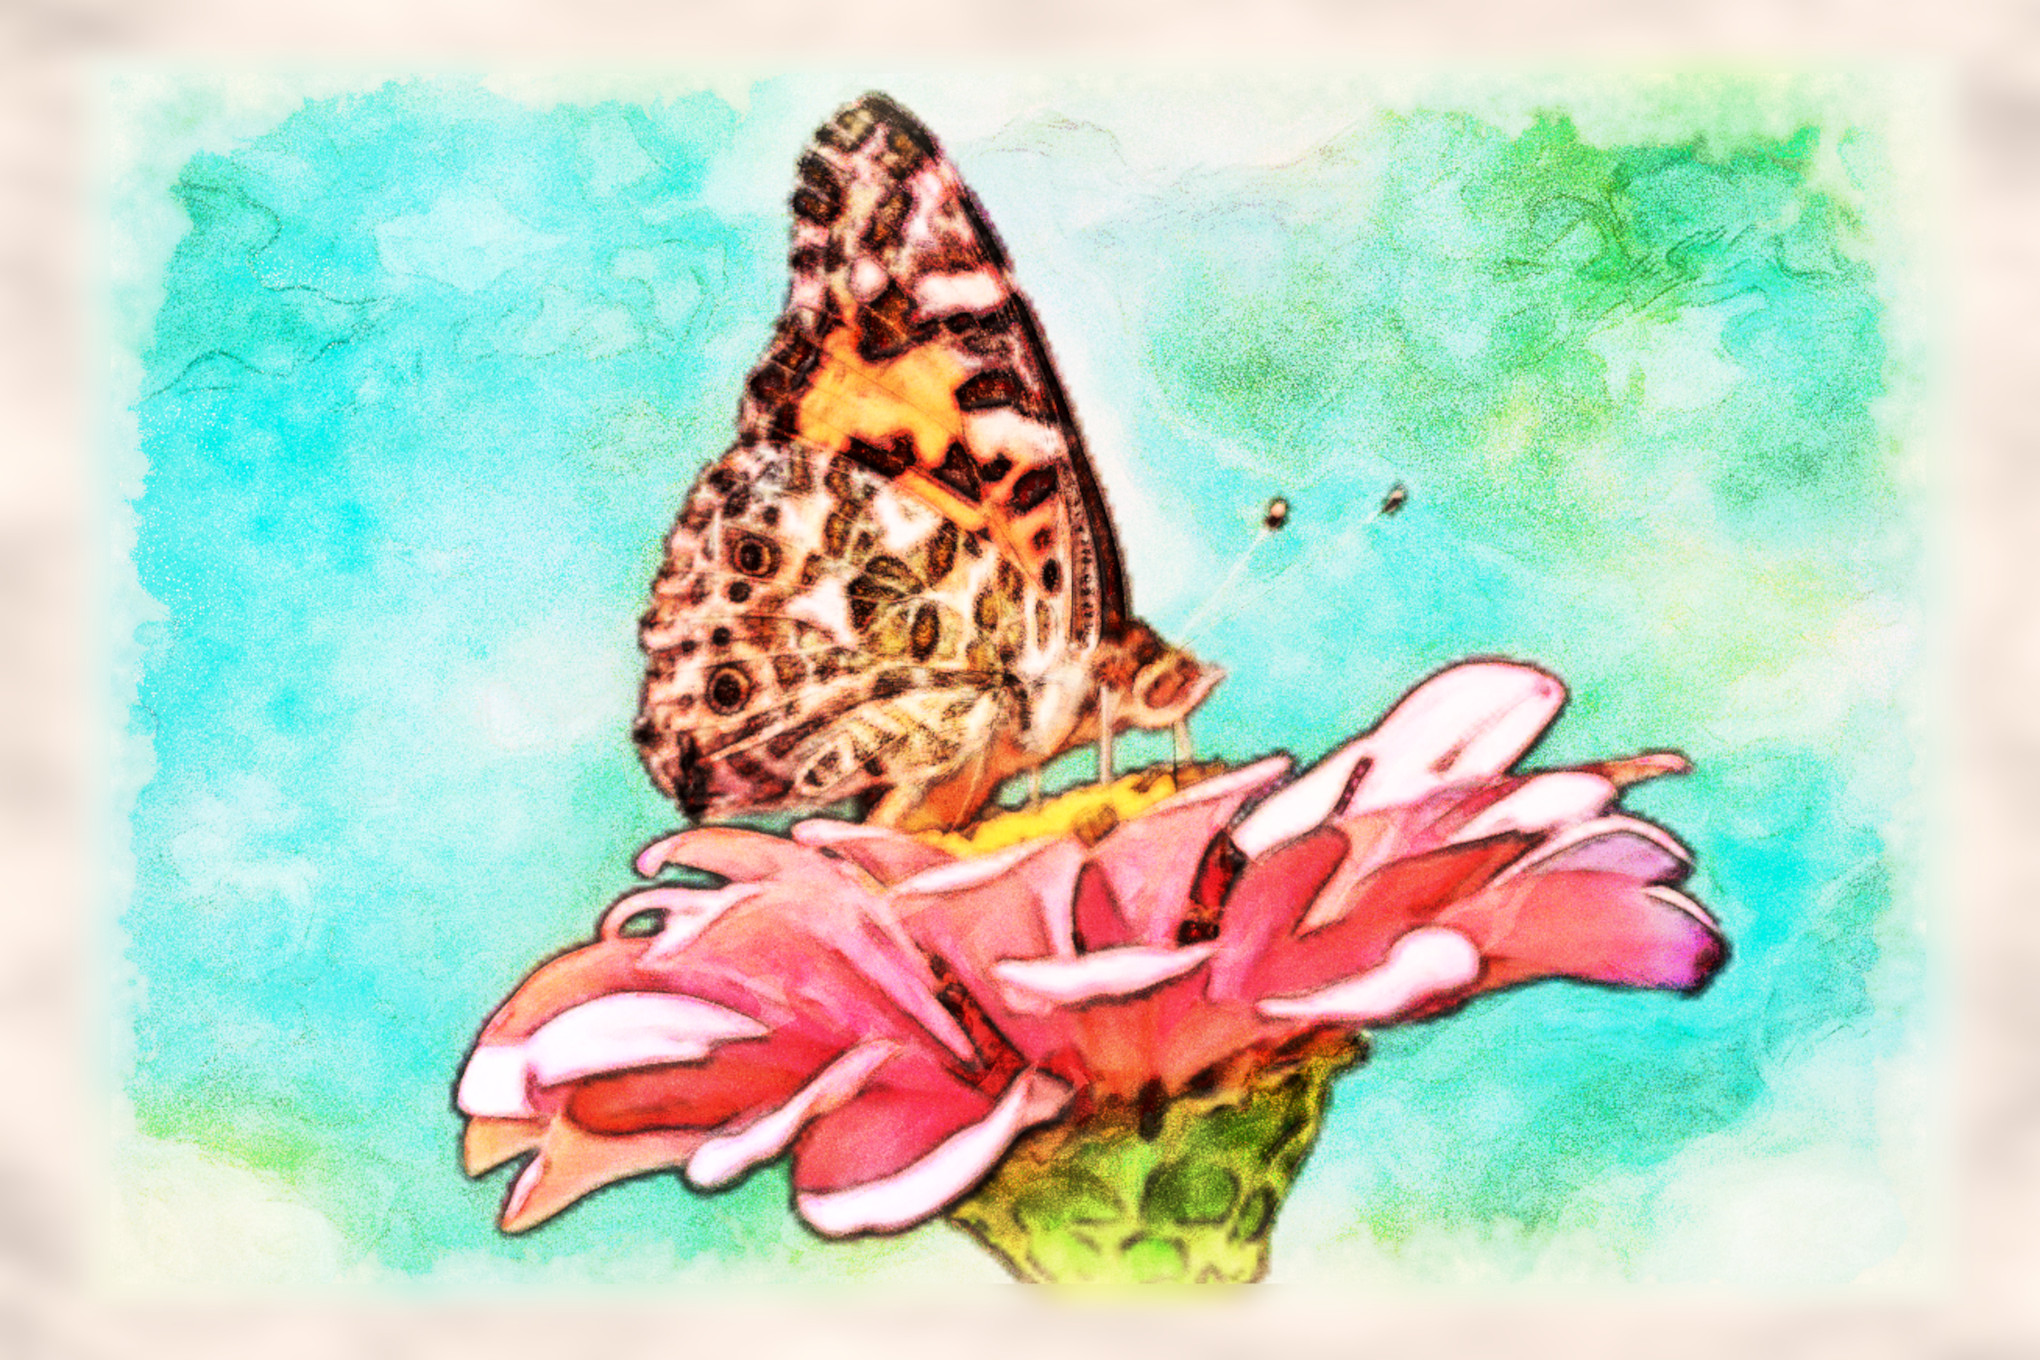 2023-09-30 17-25-23 butterfly-4392735 with a Watercolor Pastels Effect 2023 (4.0,80.0,20.0,50.0,20.0,9.0,70.0,True,0).jpg